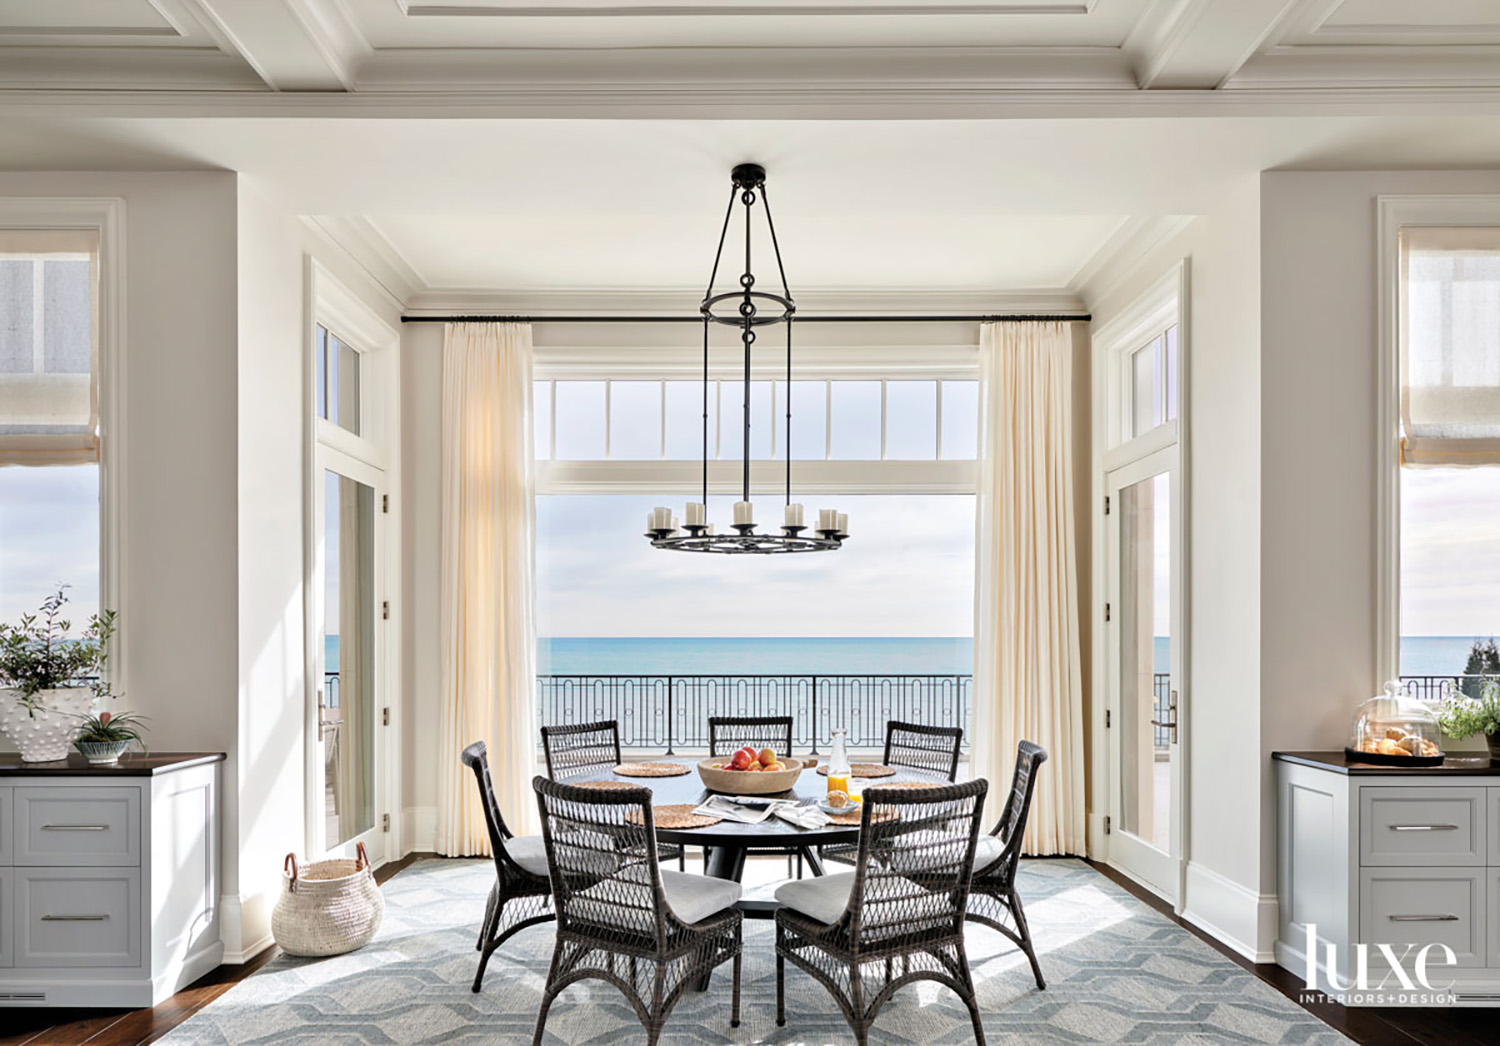 A round dining table surrounded by seven chairs that provide views out to the lake.